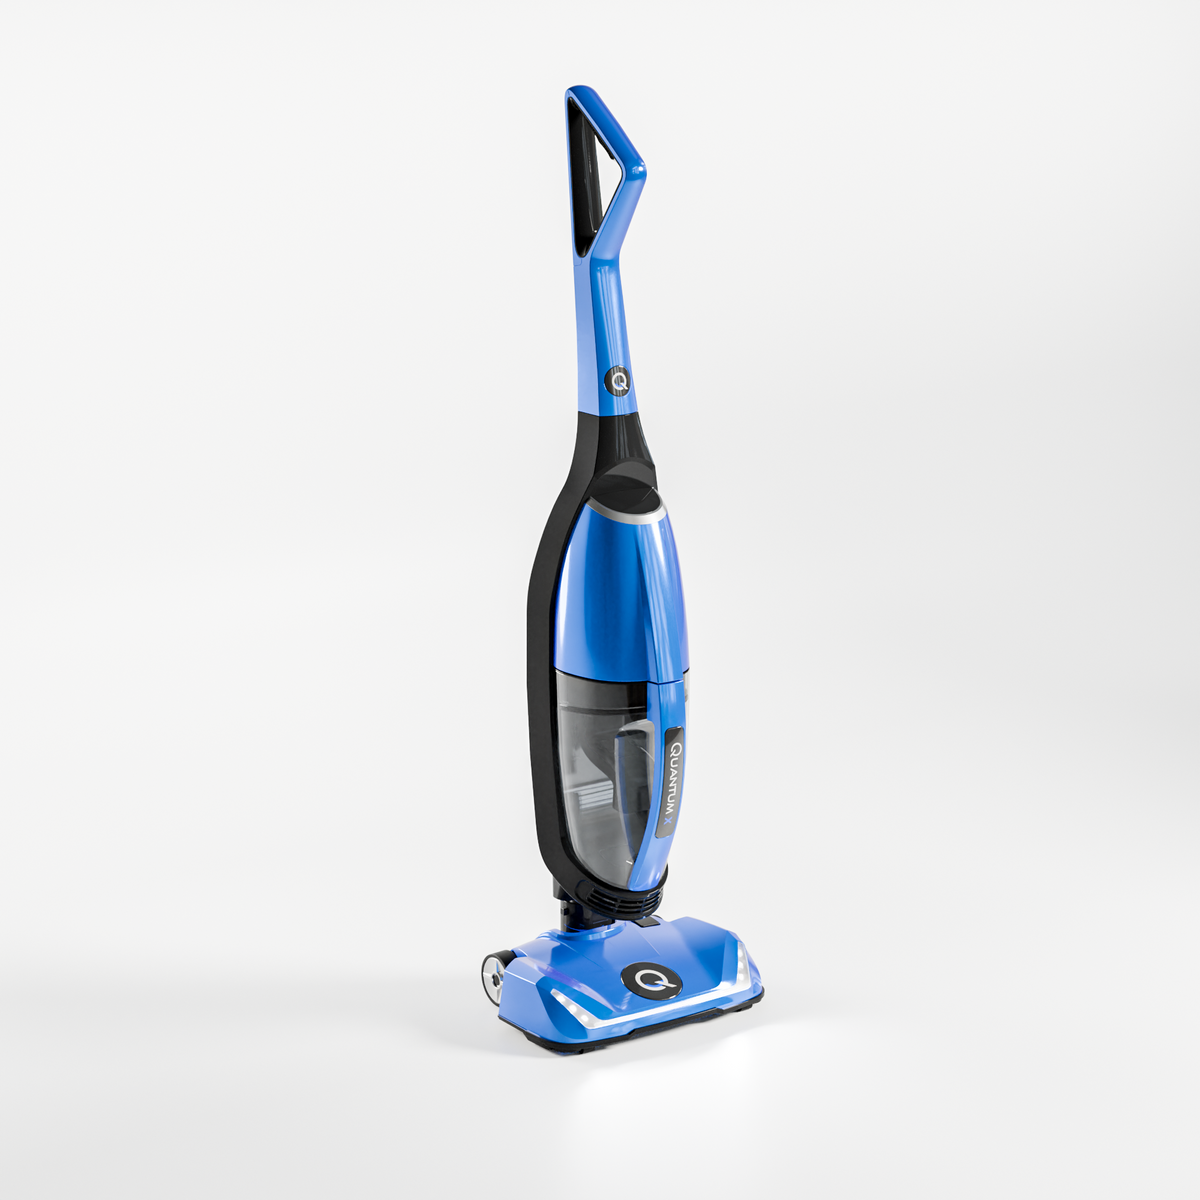 Home: Meet The World's First and Only Upright Water Filtration Vacuum